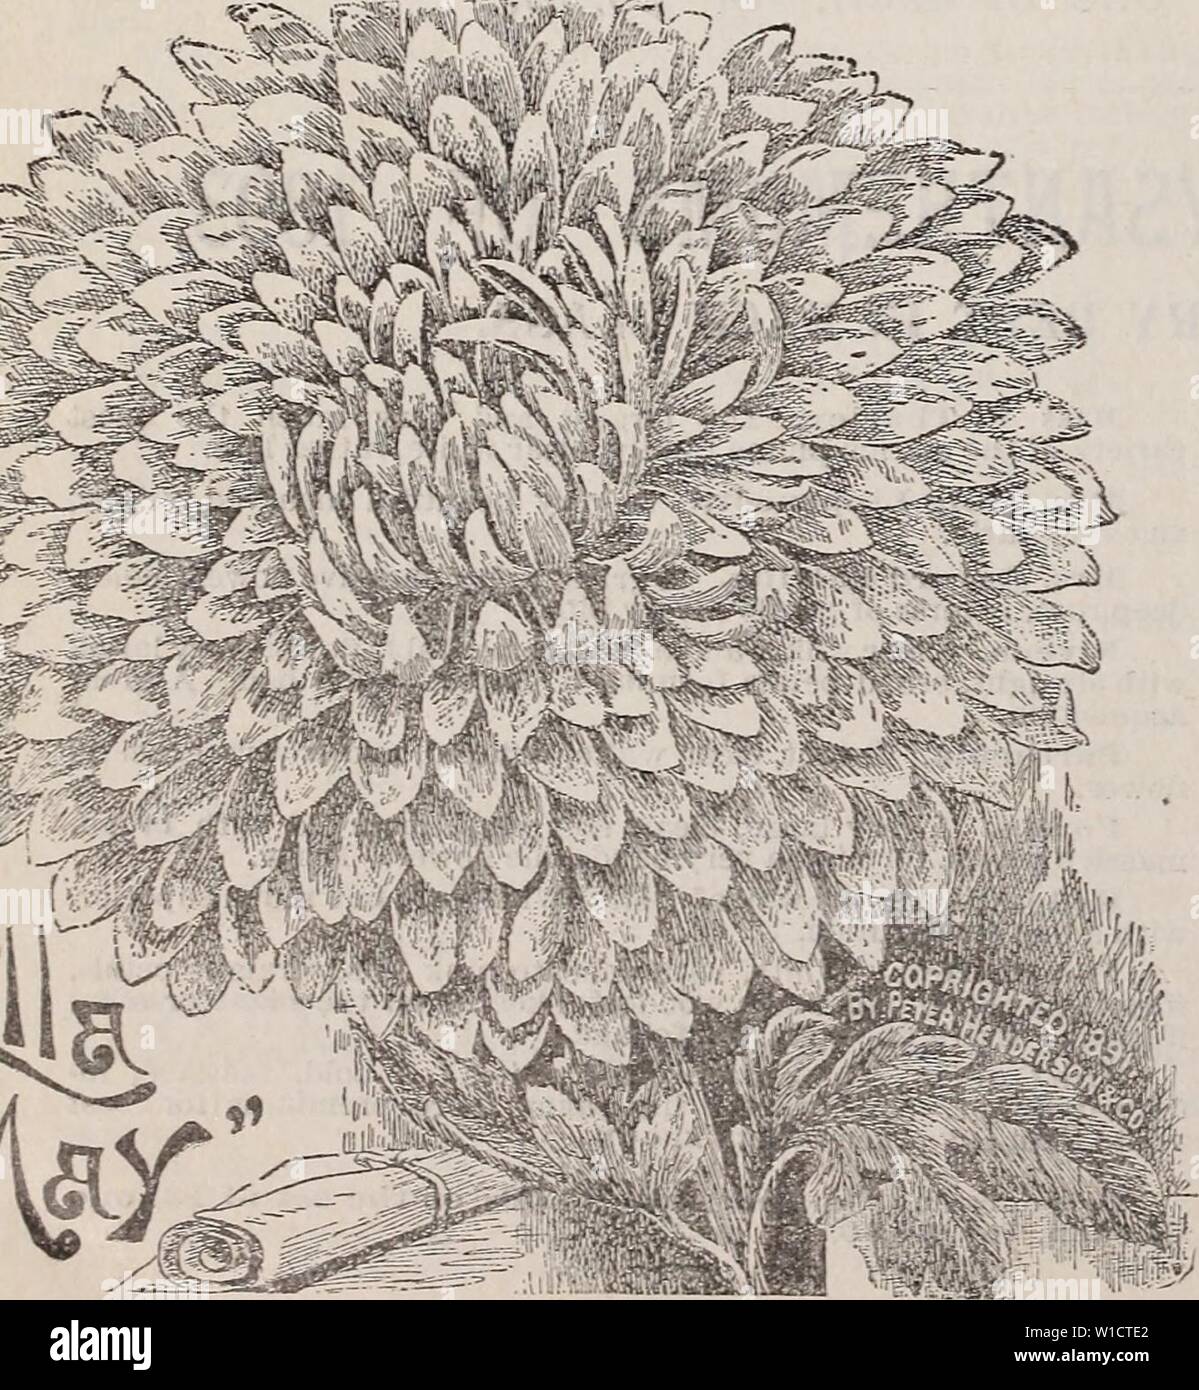 Archive image from page 75 of Descriptive catalogue of vegetable, flower,. Descriptive catalogue of vegetable, flower, and farm seeds : bulbs, roots, plants, tools . descriptivecatal1894weeb Year: 1894  72 WEEBER & DON.âCHRYSANTHEMU:.IS. CHRYSANTHEMUMS.âContinued. SEEDLINGS OF MERIT. Of Eecent Introduction. Oettysburgli. The outer petals are broad and drooping, and have a lustrous sheen in the sunlight. The form is flat with droop- ing outer petals, which gives it a very gracefiil appearance. Splendid crimson color. Good Gracious. Color unique, being a delicate shade of peach p:nk throughout. Stock Photo